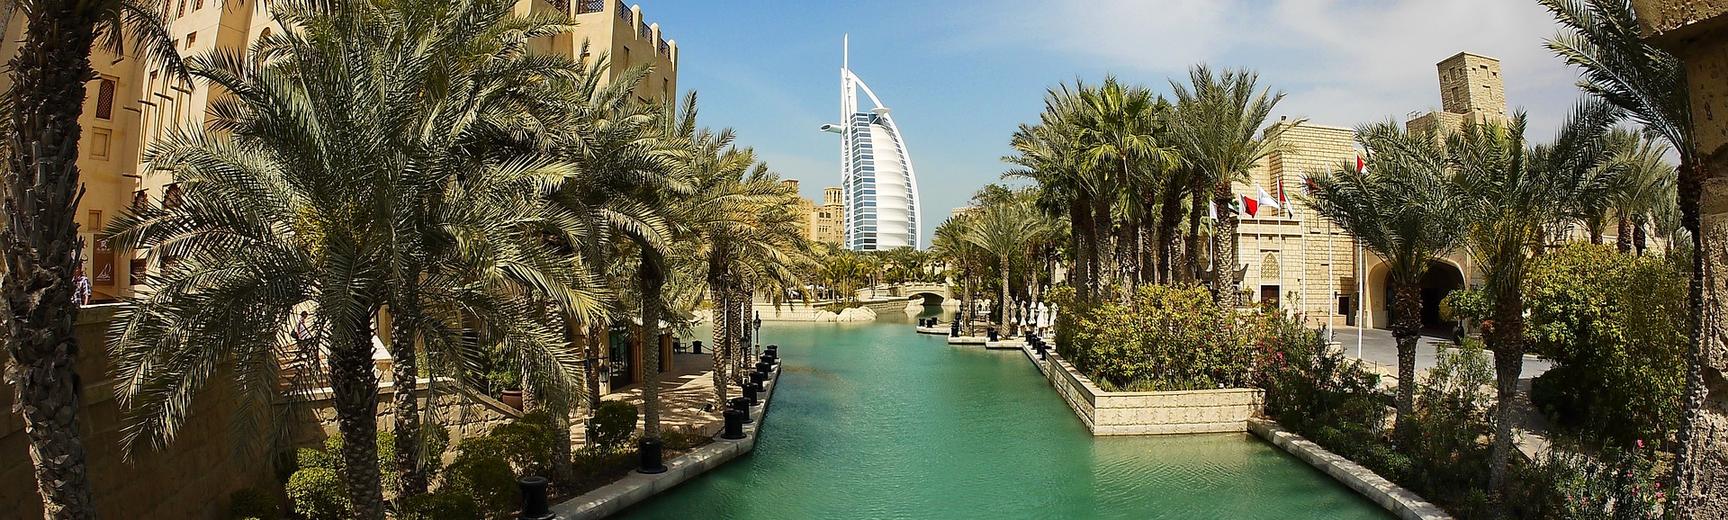 An inland waterway in Dubai, framed by palm trees, with the Burj-al-Arab in the background